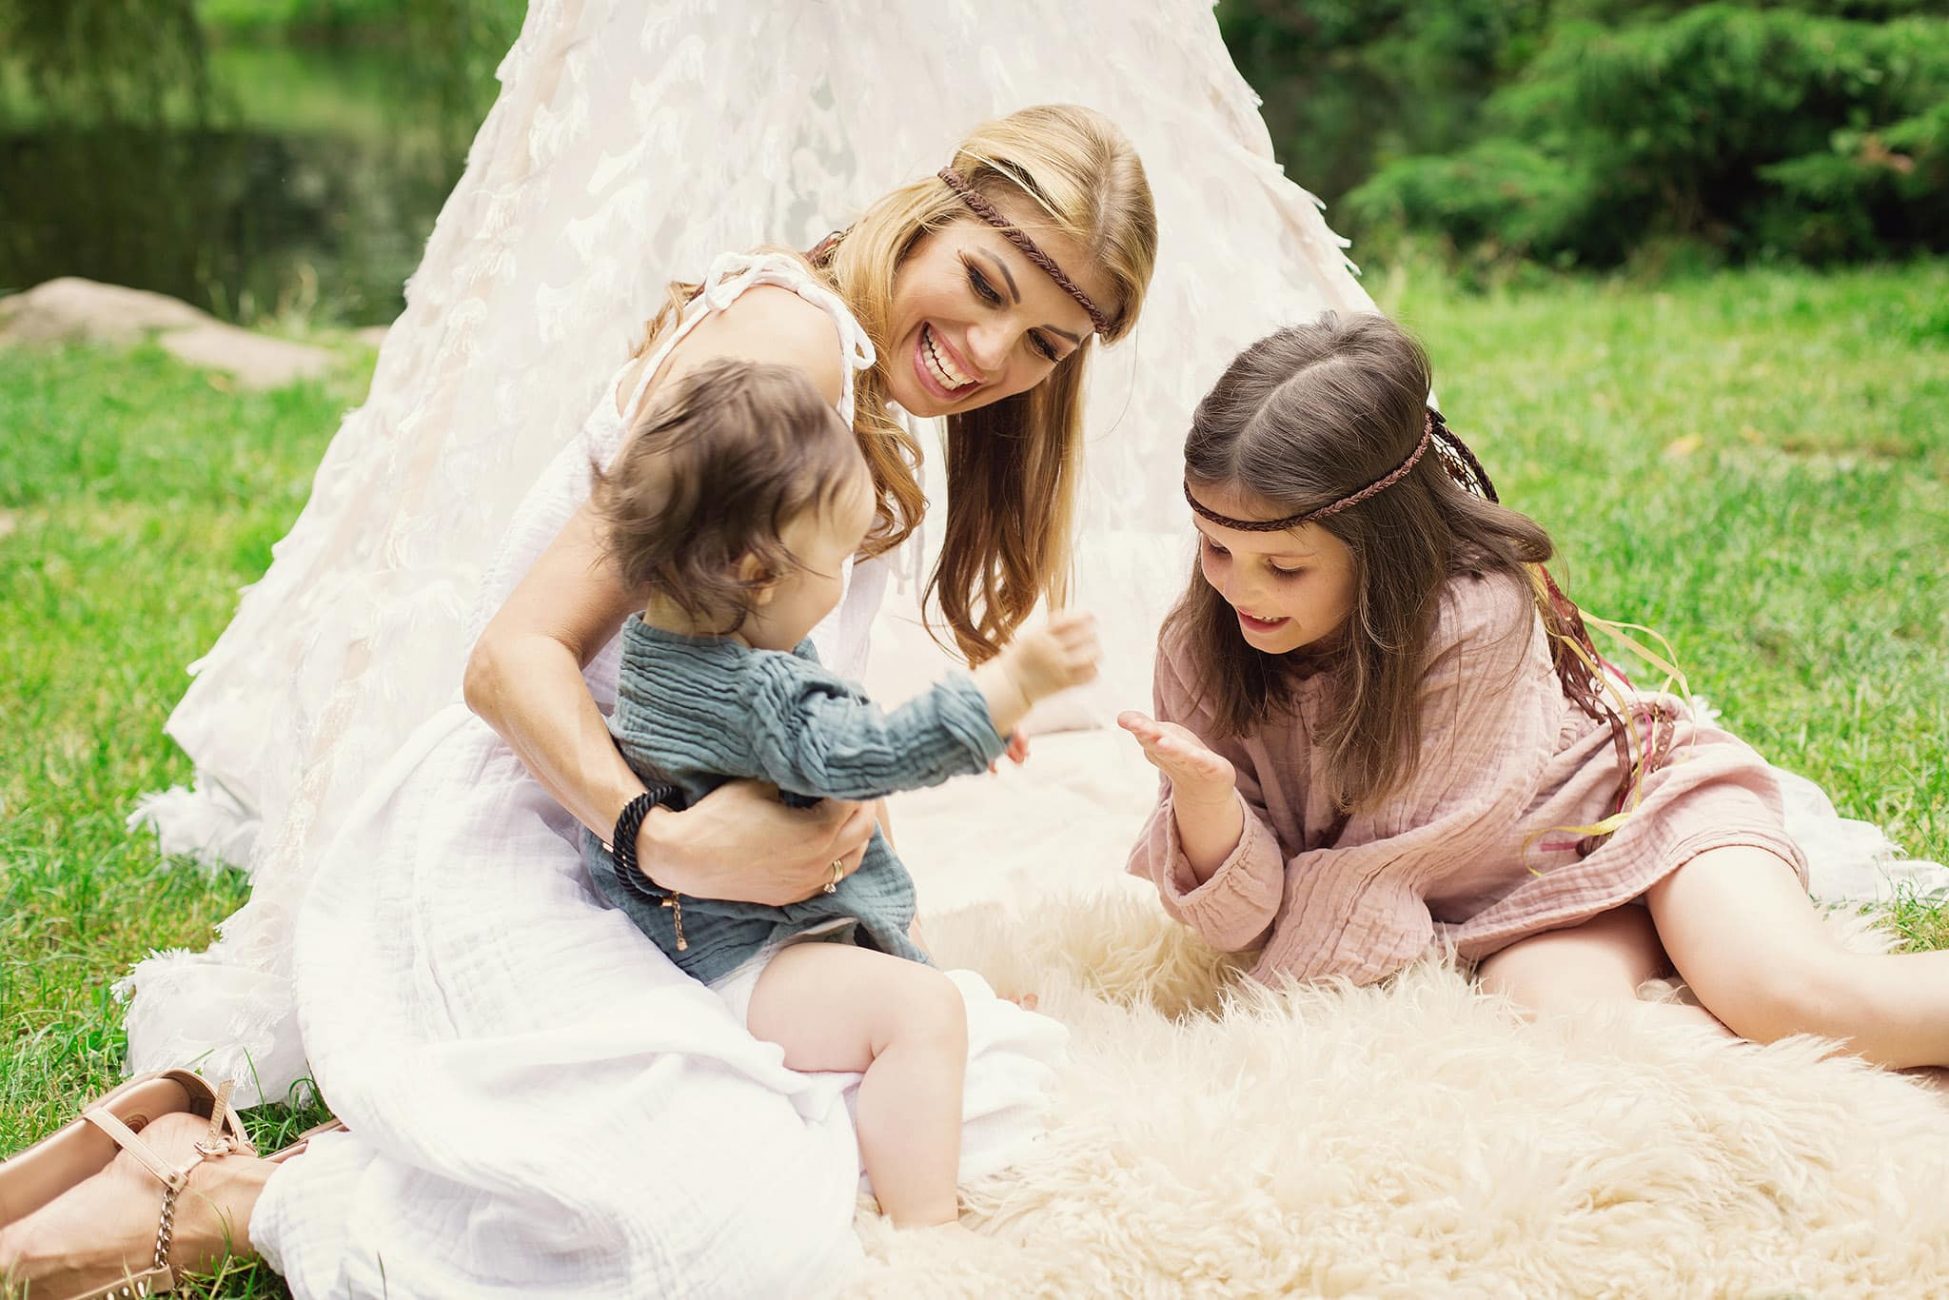 The benefits of having childcare at a wedding, wedding babysitters, nanny at wedding, nanny weddings, childcare for weddings